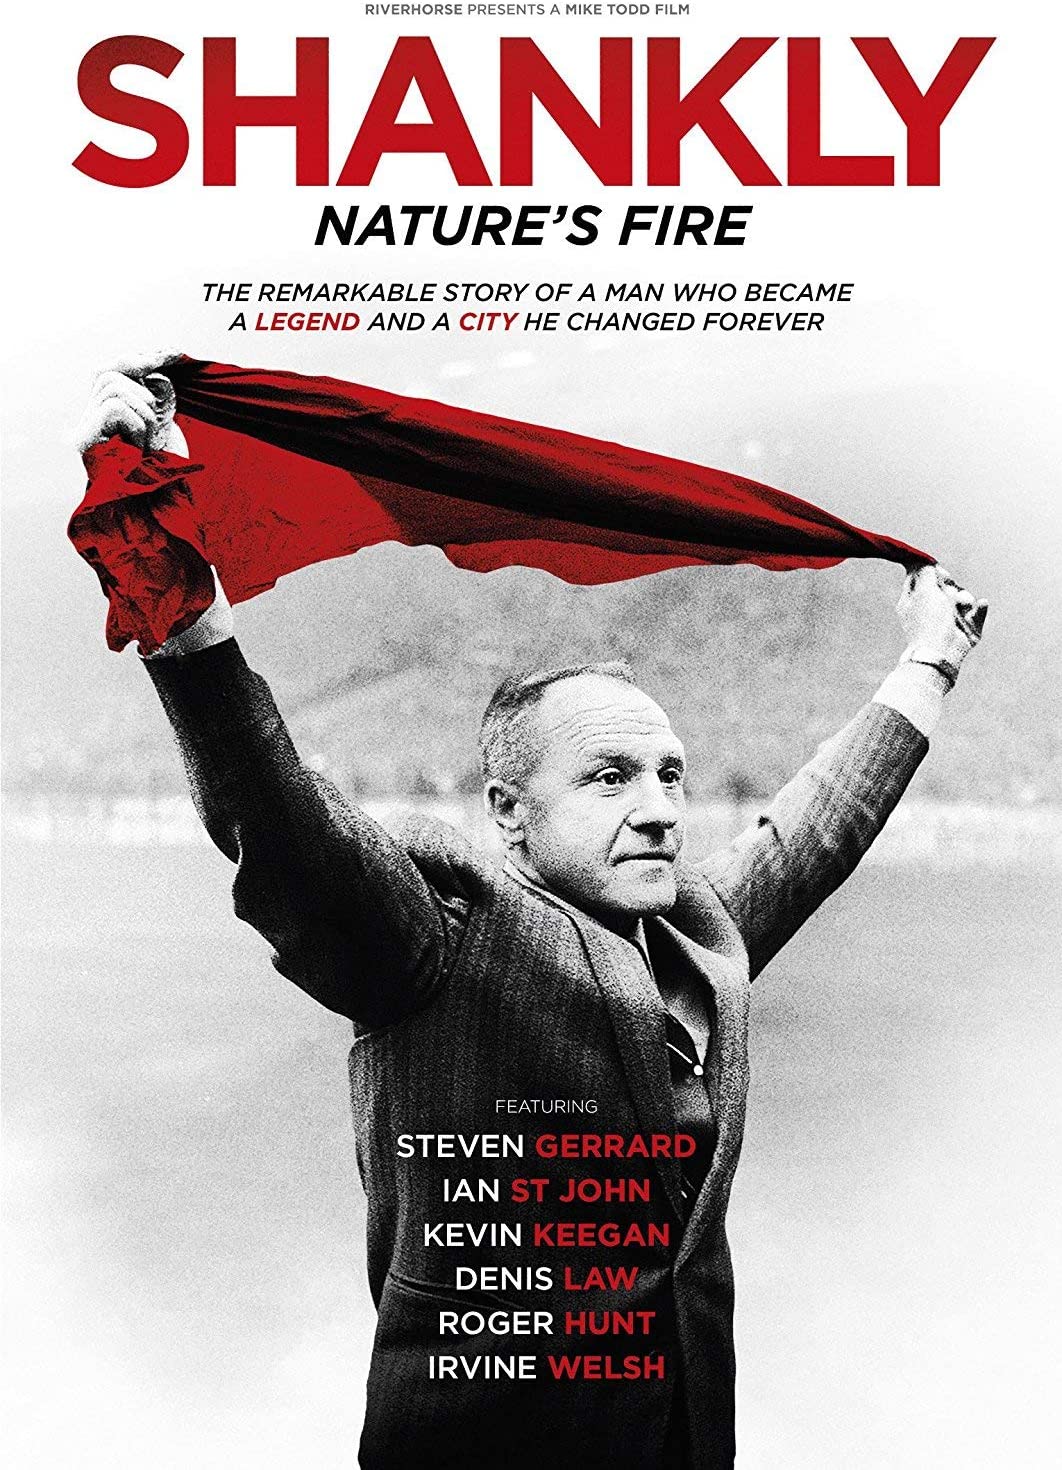 Shankly: Nature's Fire [2017] - Documentary [DVD]